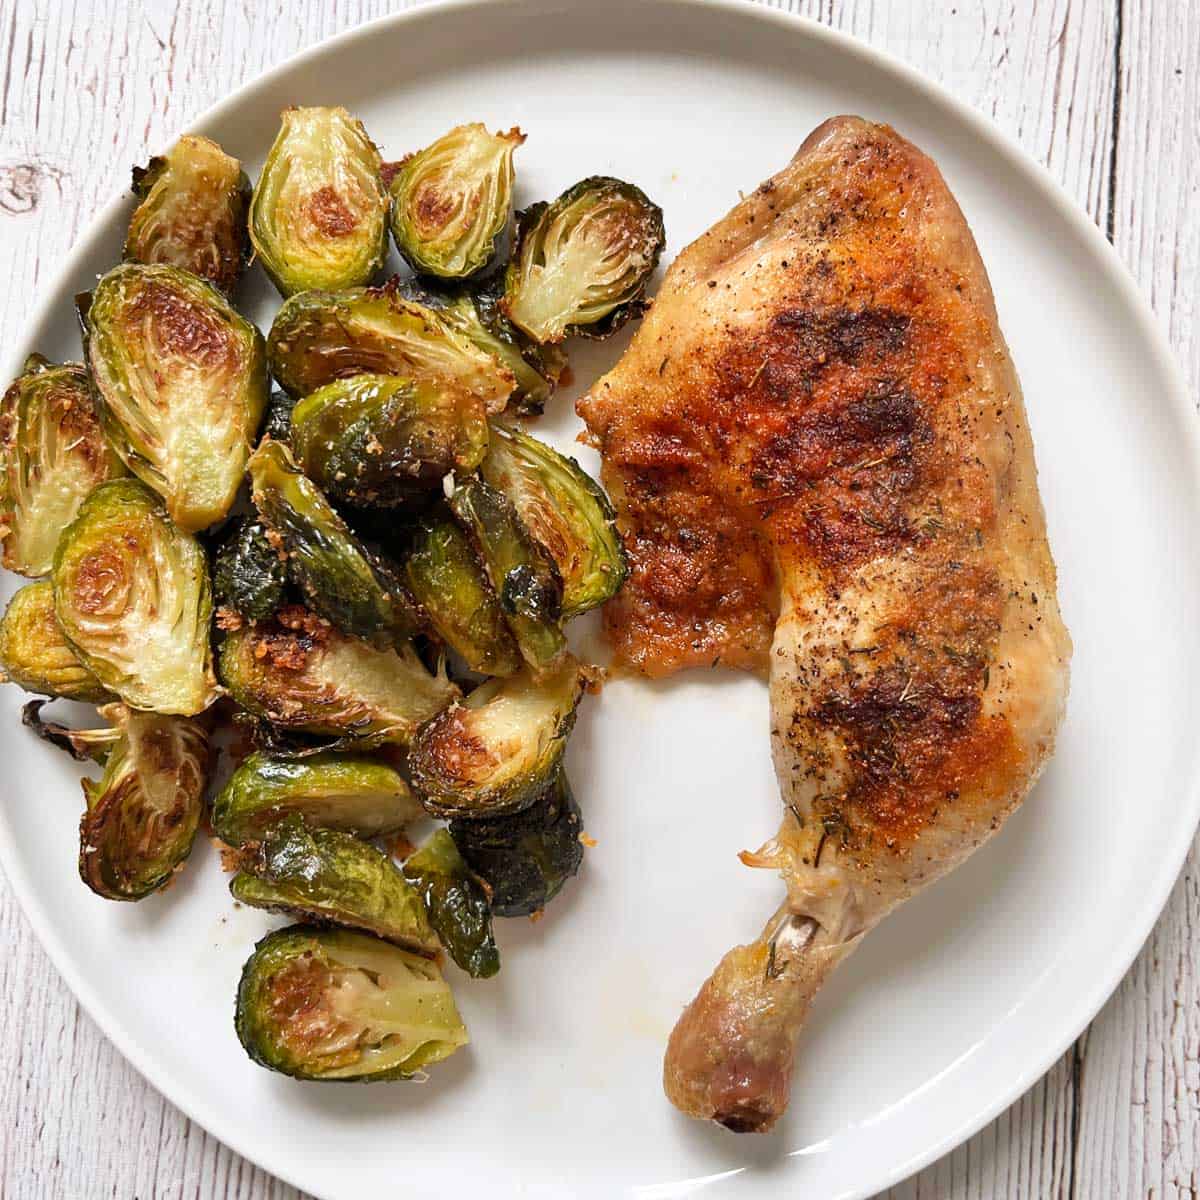 A chicken quarter is served on a white plate with roasted Brussels sprouts.